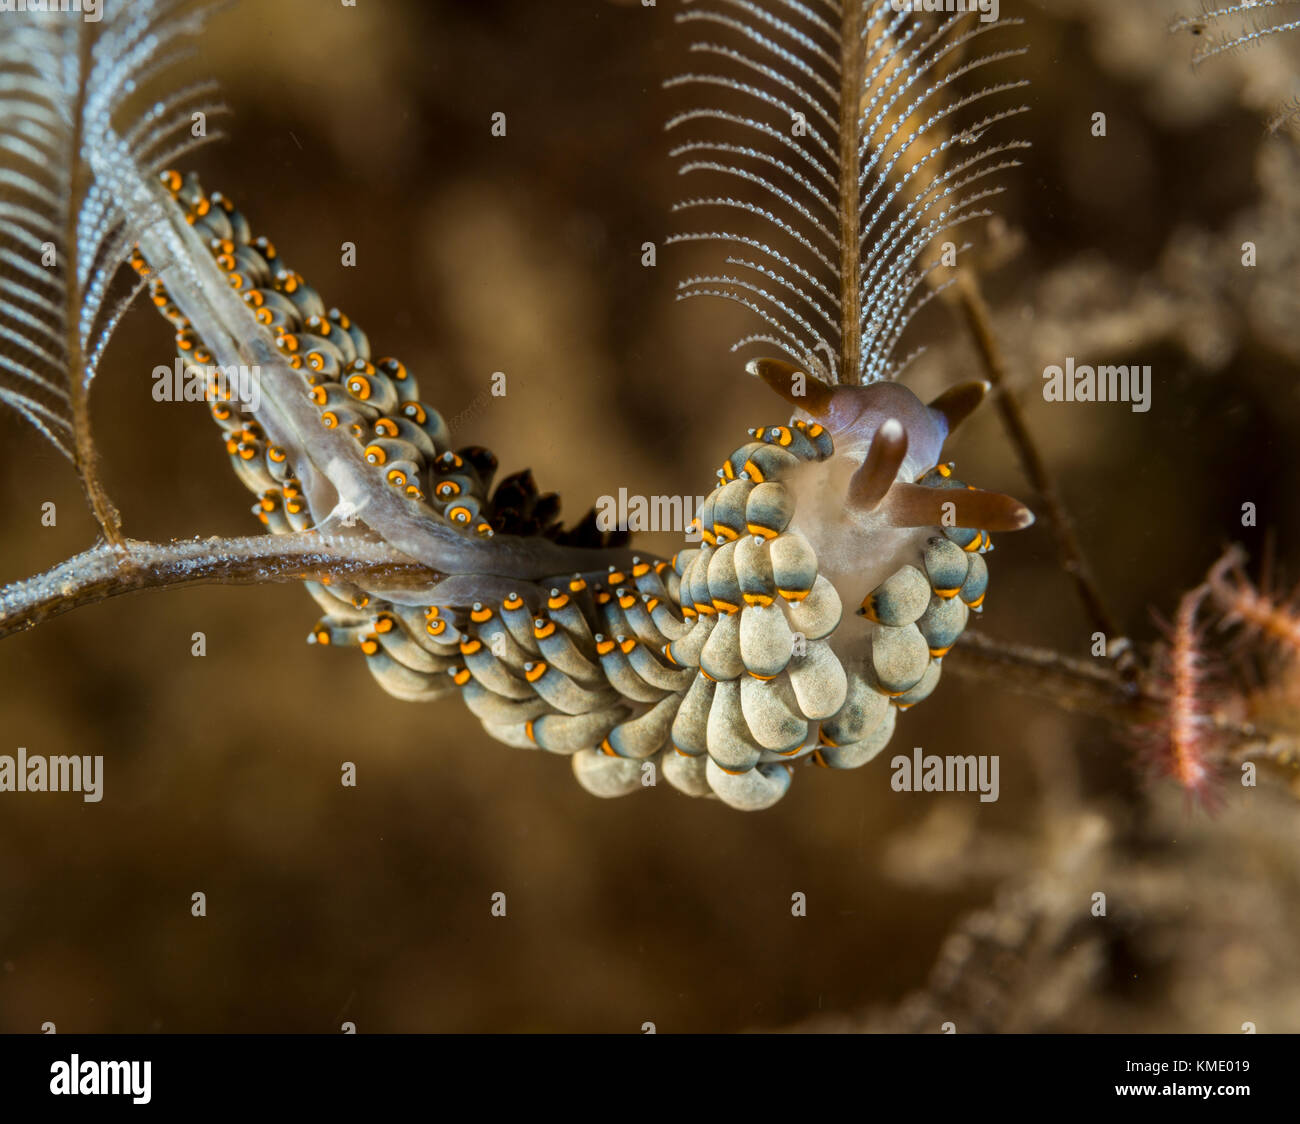 Trinchesia yamasui's nudibranch on a coral Stock Photo